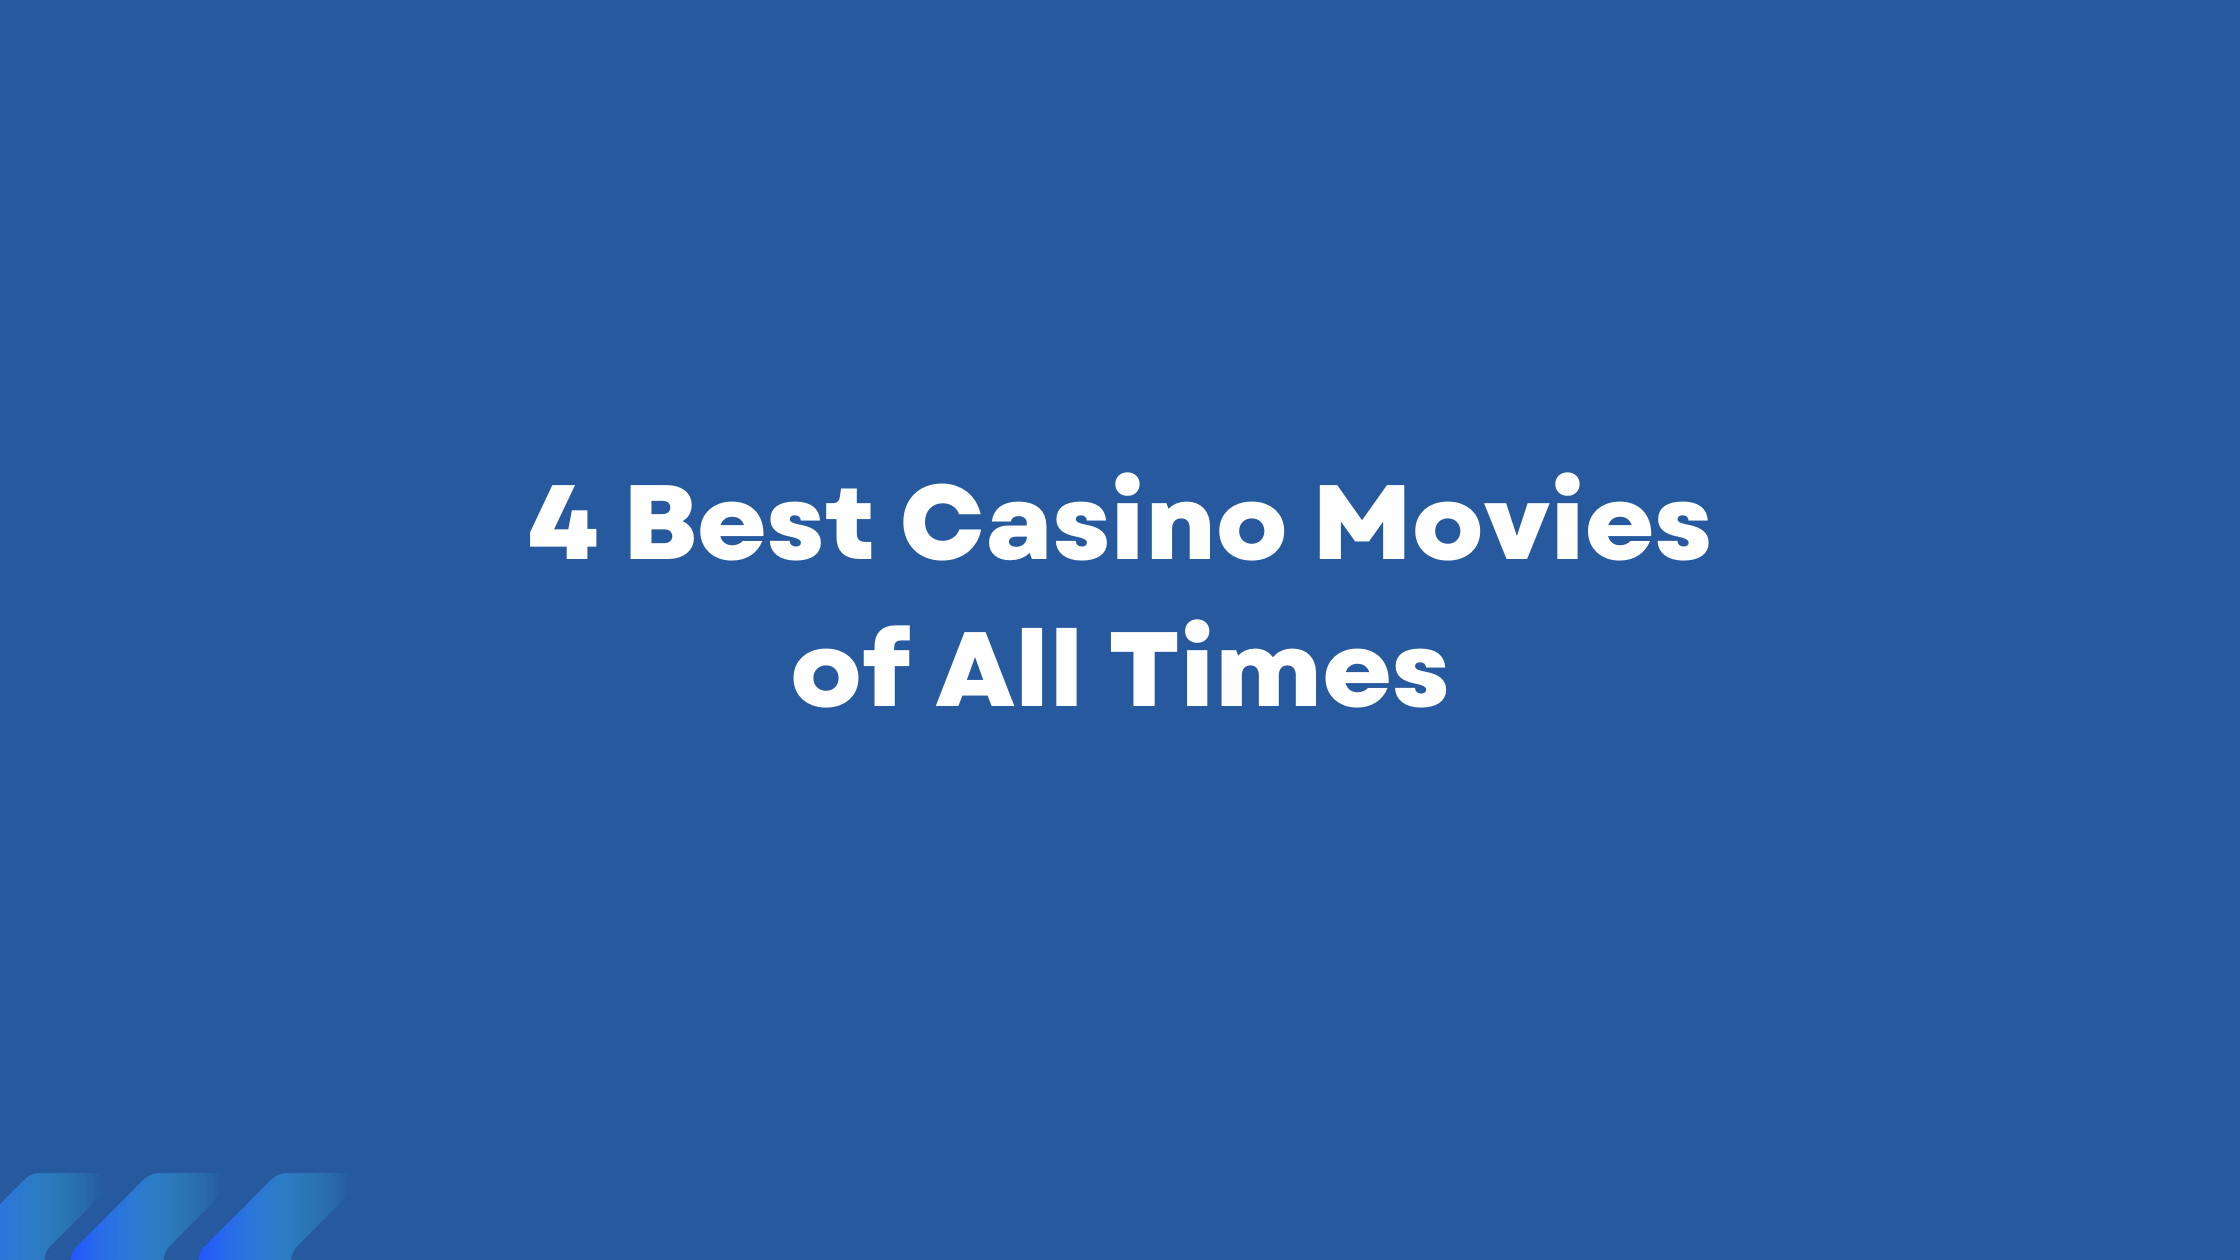 4 Best Casino Movies of All Times